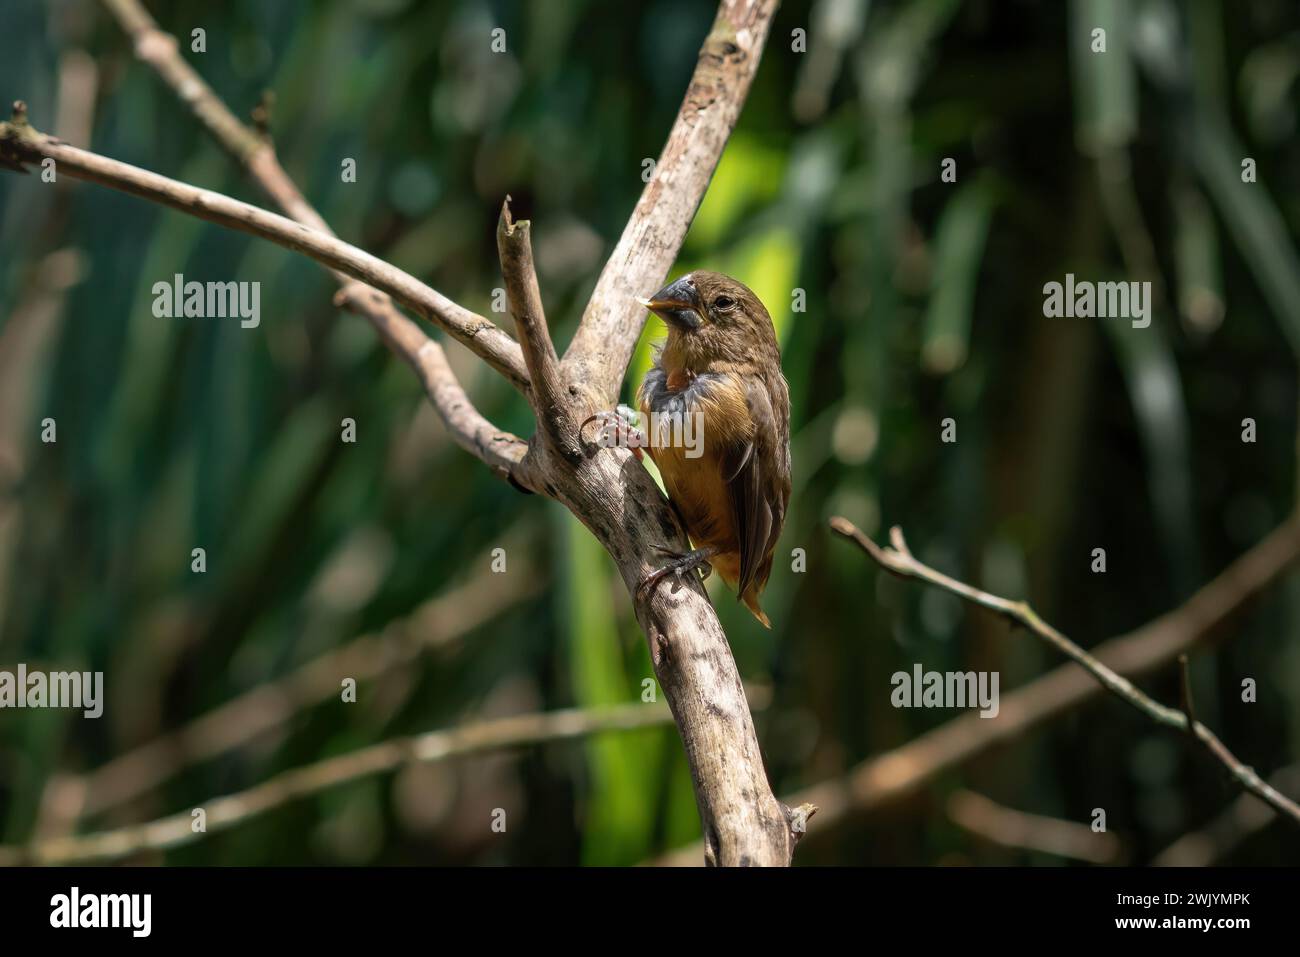 Female Chestnut-bellied Seed Finch (Sporophila angolensis) Stock Photo